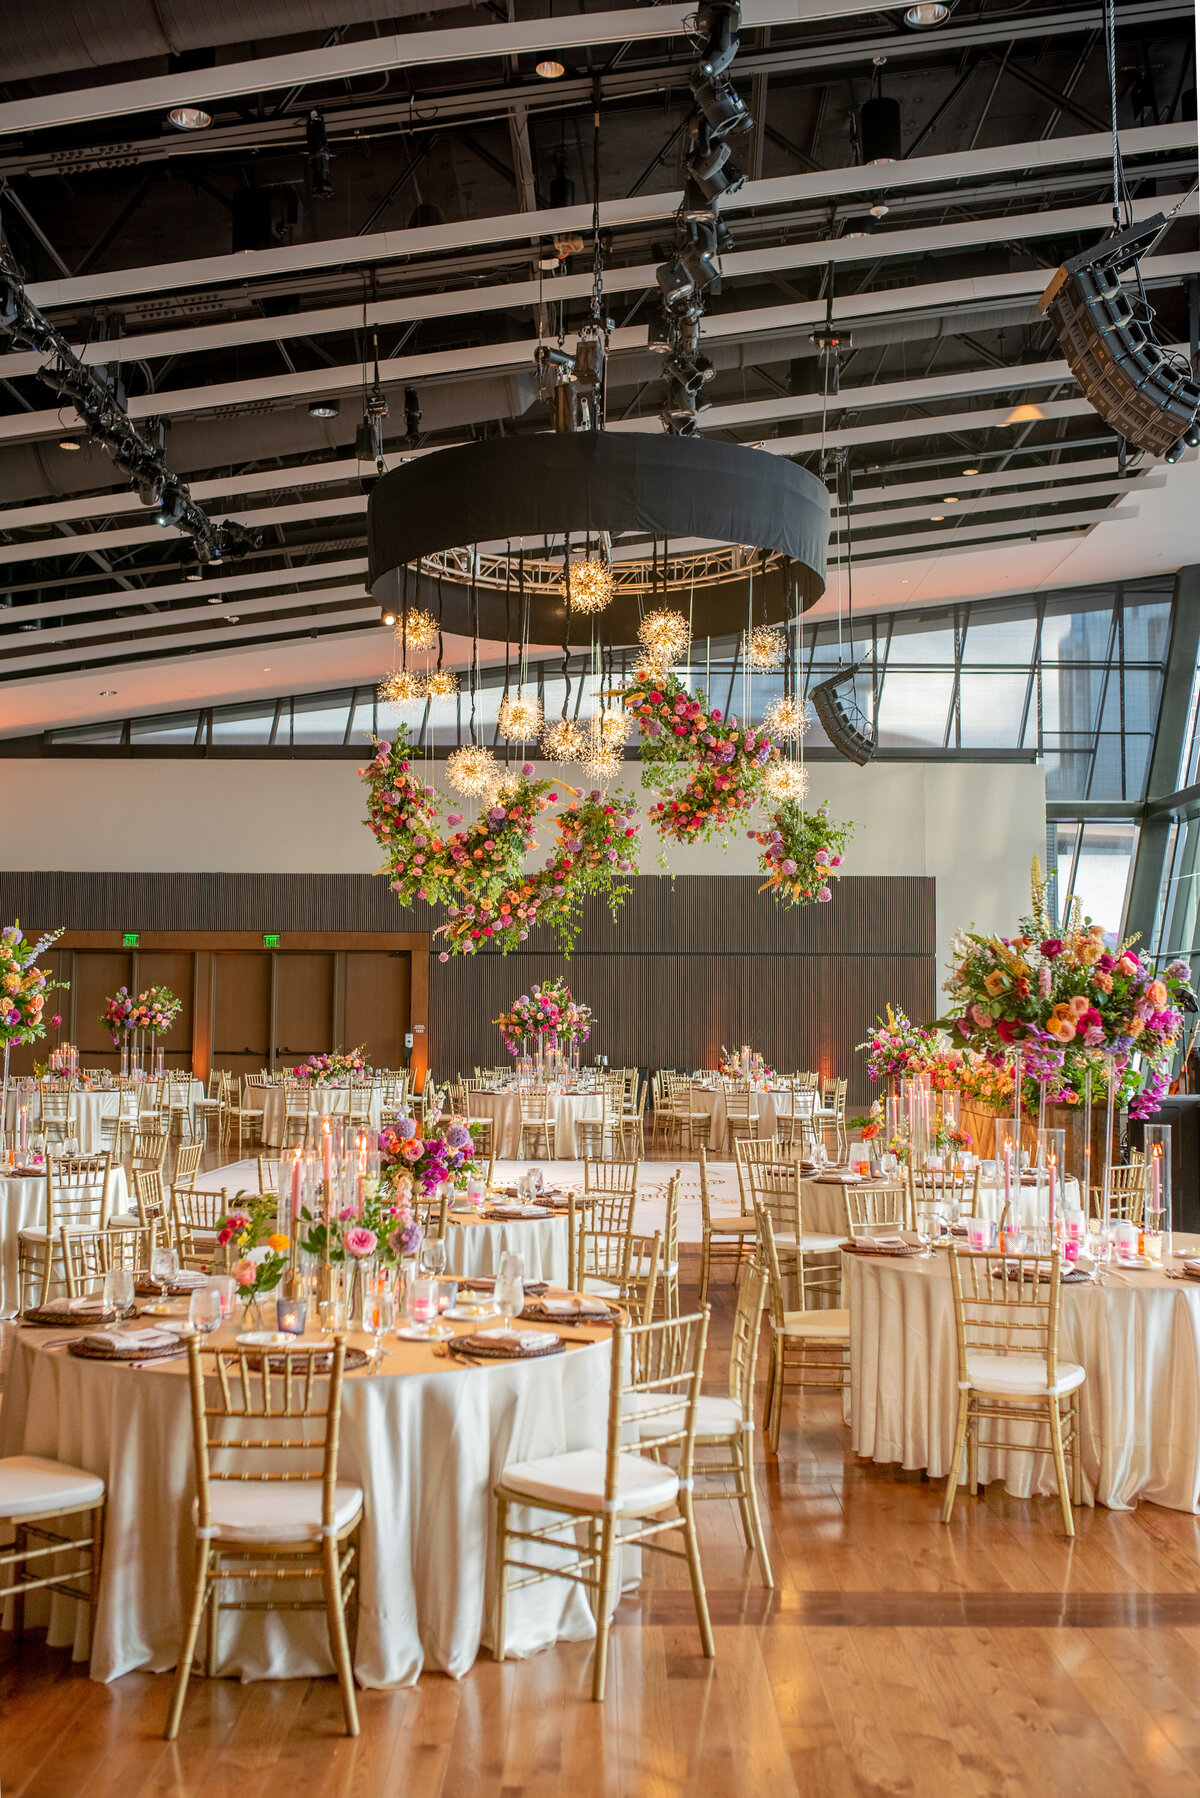 Joyful hanging floral cloud chandelier installation composed of petal heavy roses, allium, eremurus, delphinium, snapdragons, spray roses and garden-inspired greenery in hues of pink, fuchsia, lavender, orange, and golden yellow lighting up the dance floor of this summer wedding. Design by Rosemary and Finch in Nashville, TN.